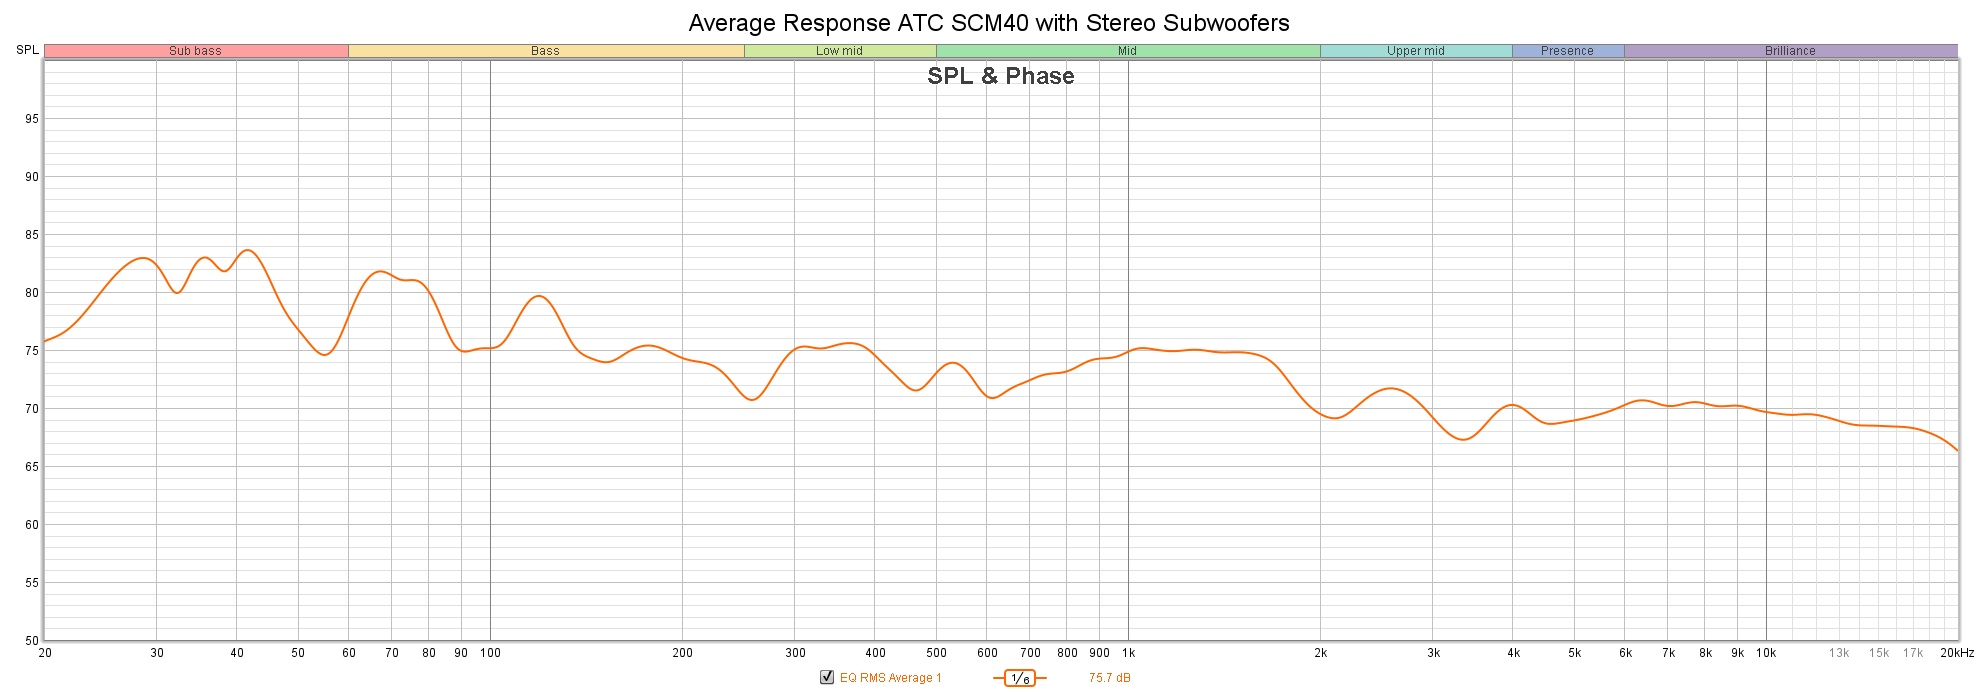 Average Response ATC SCM40 with Stereo Subwoofers.jpg